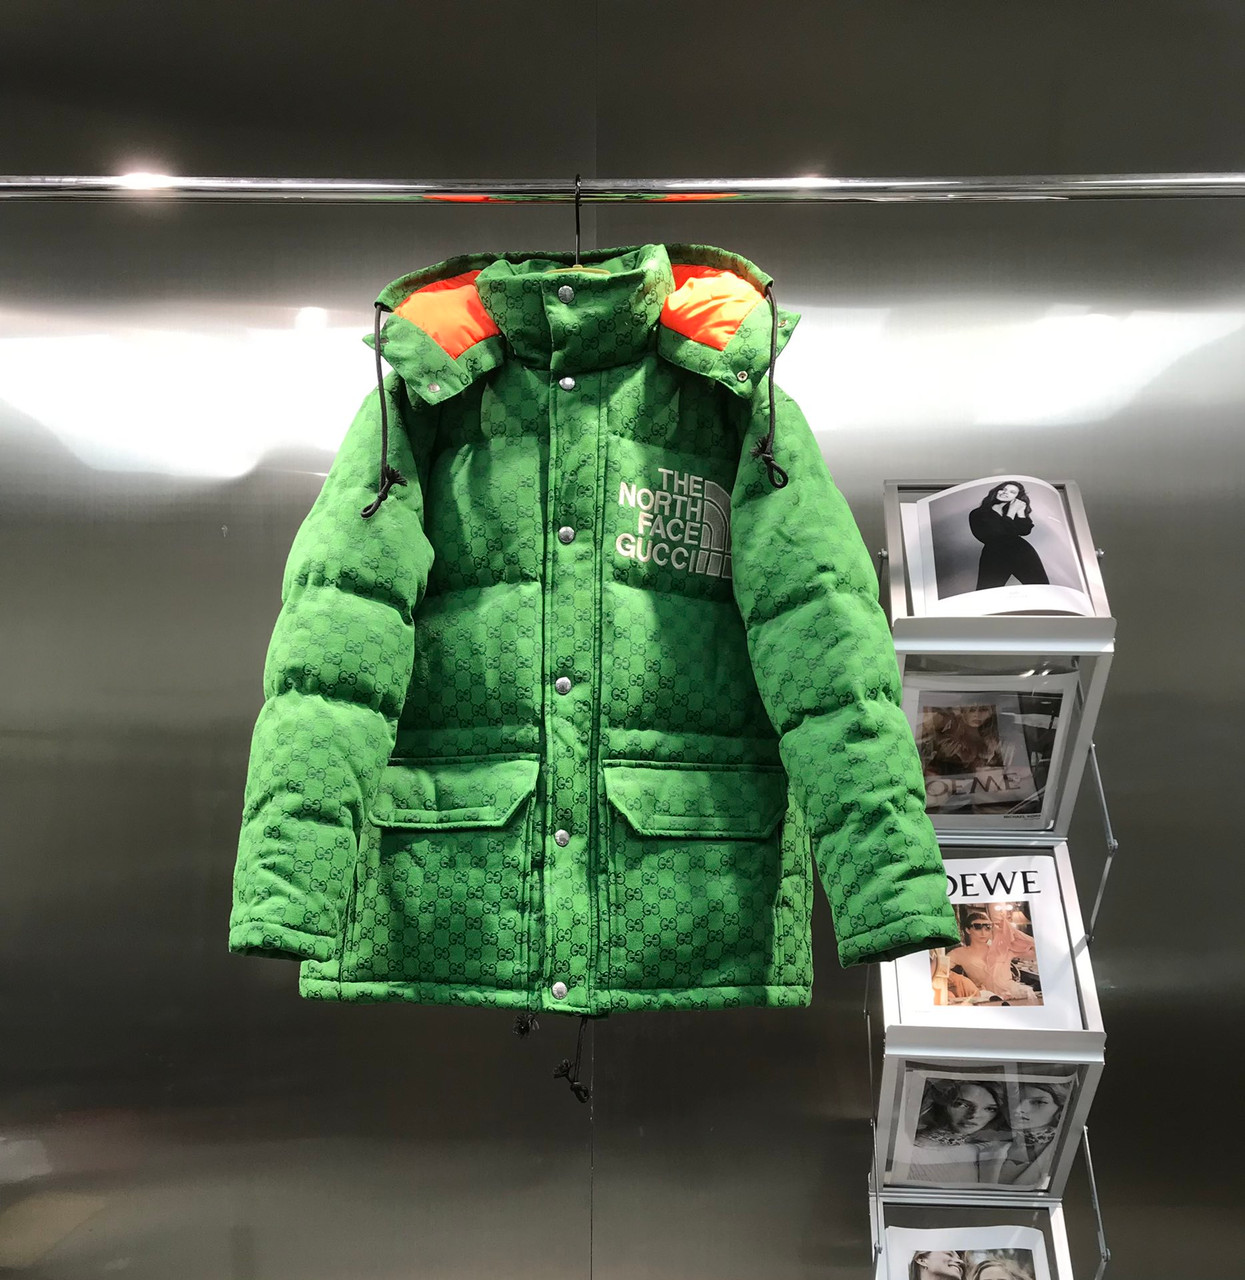 Buy Replica The North Face x Gucci Padded Jacket - Buy Designer